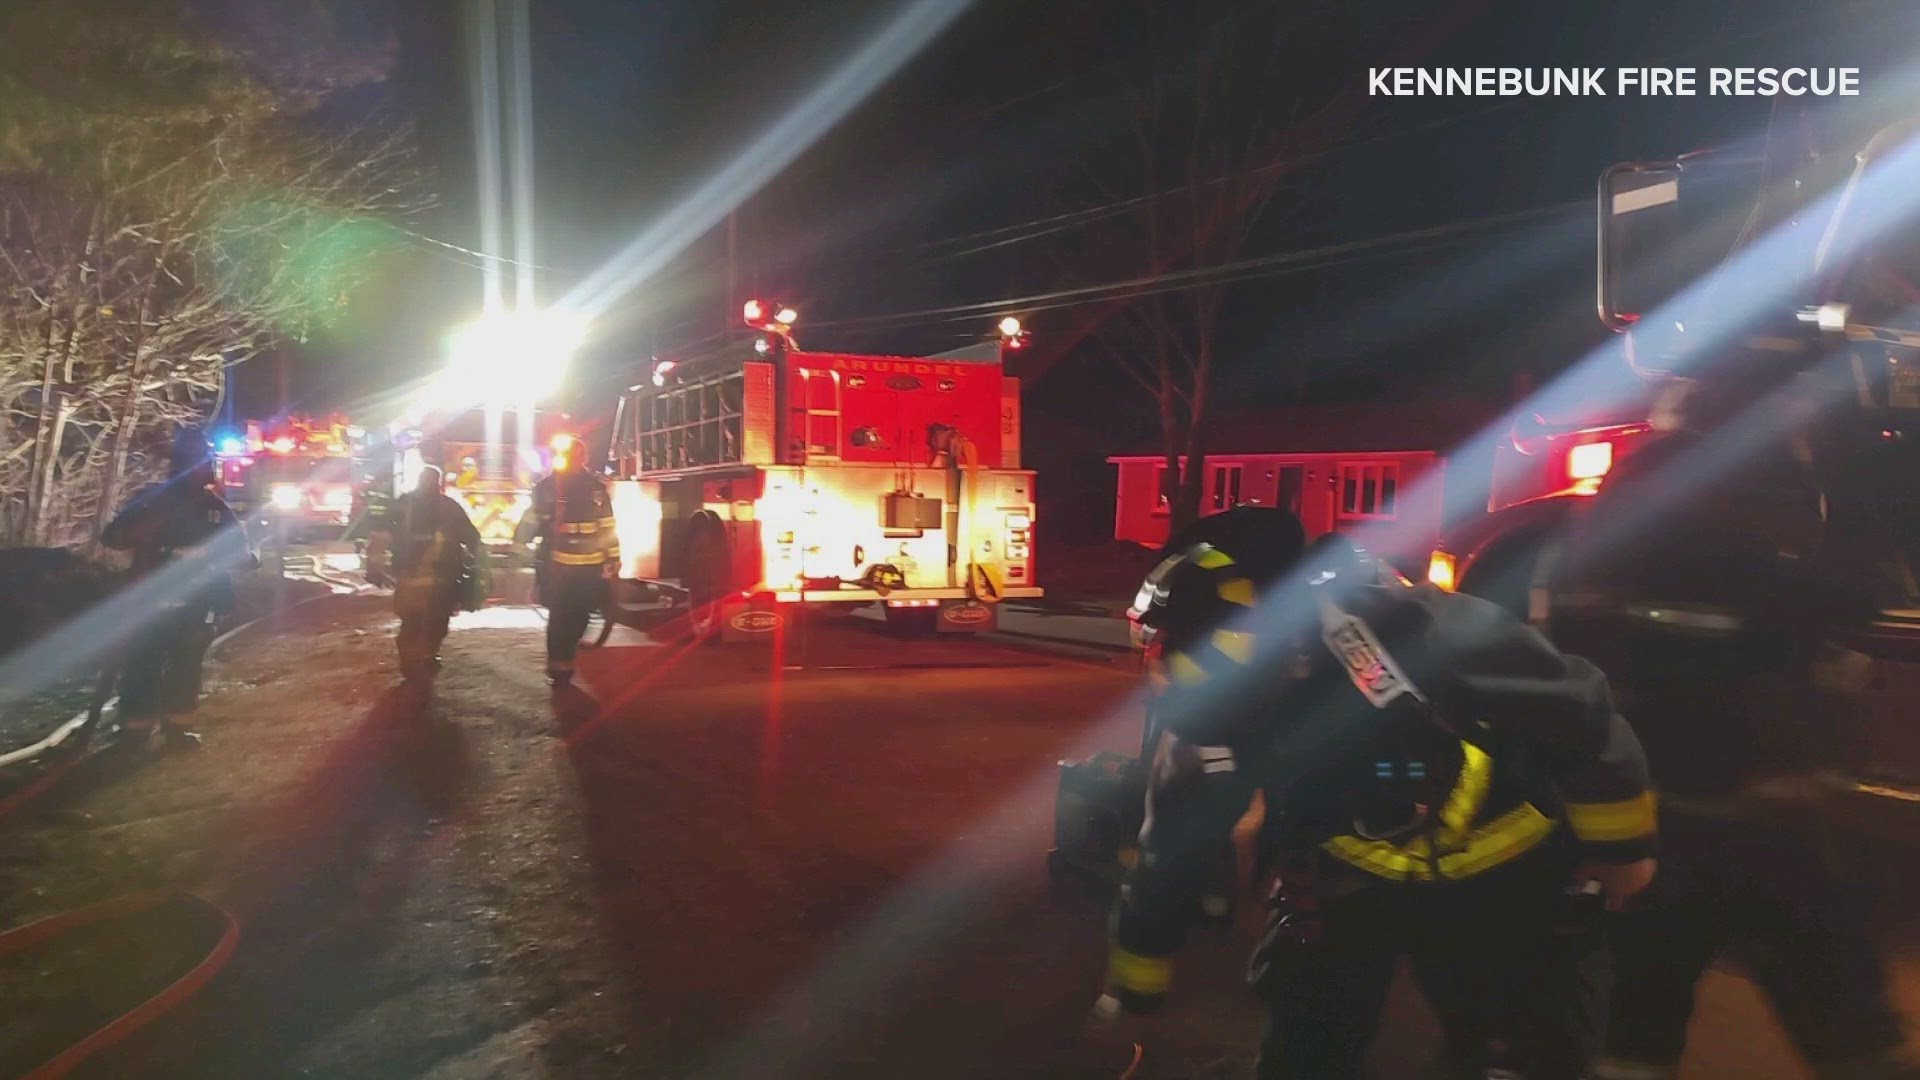 Officials said they got a call about smoke at a house on Limerick Road around 2 a.m. on Saturday, March 19.